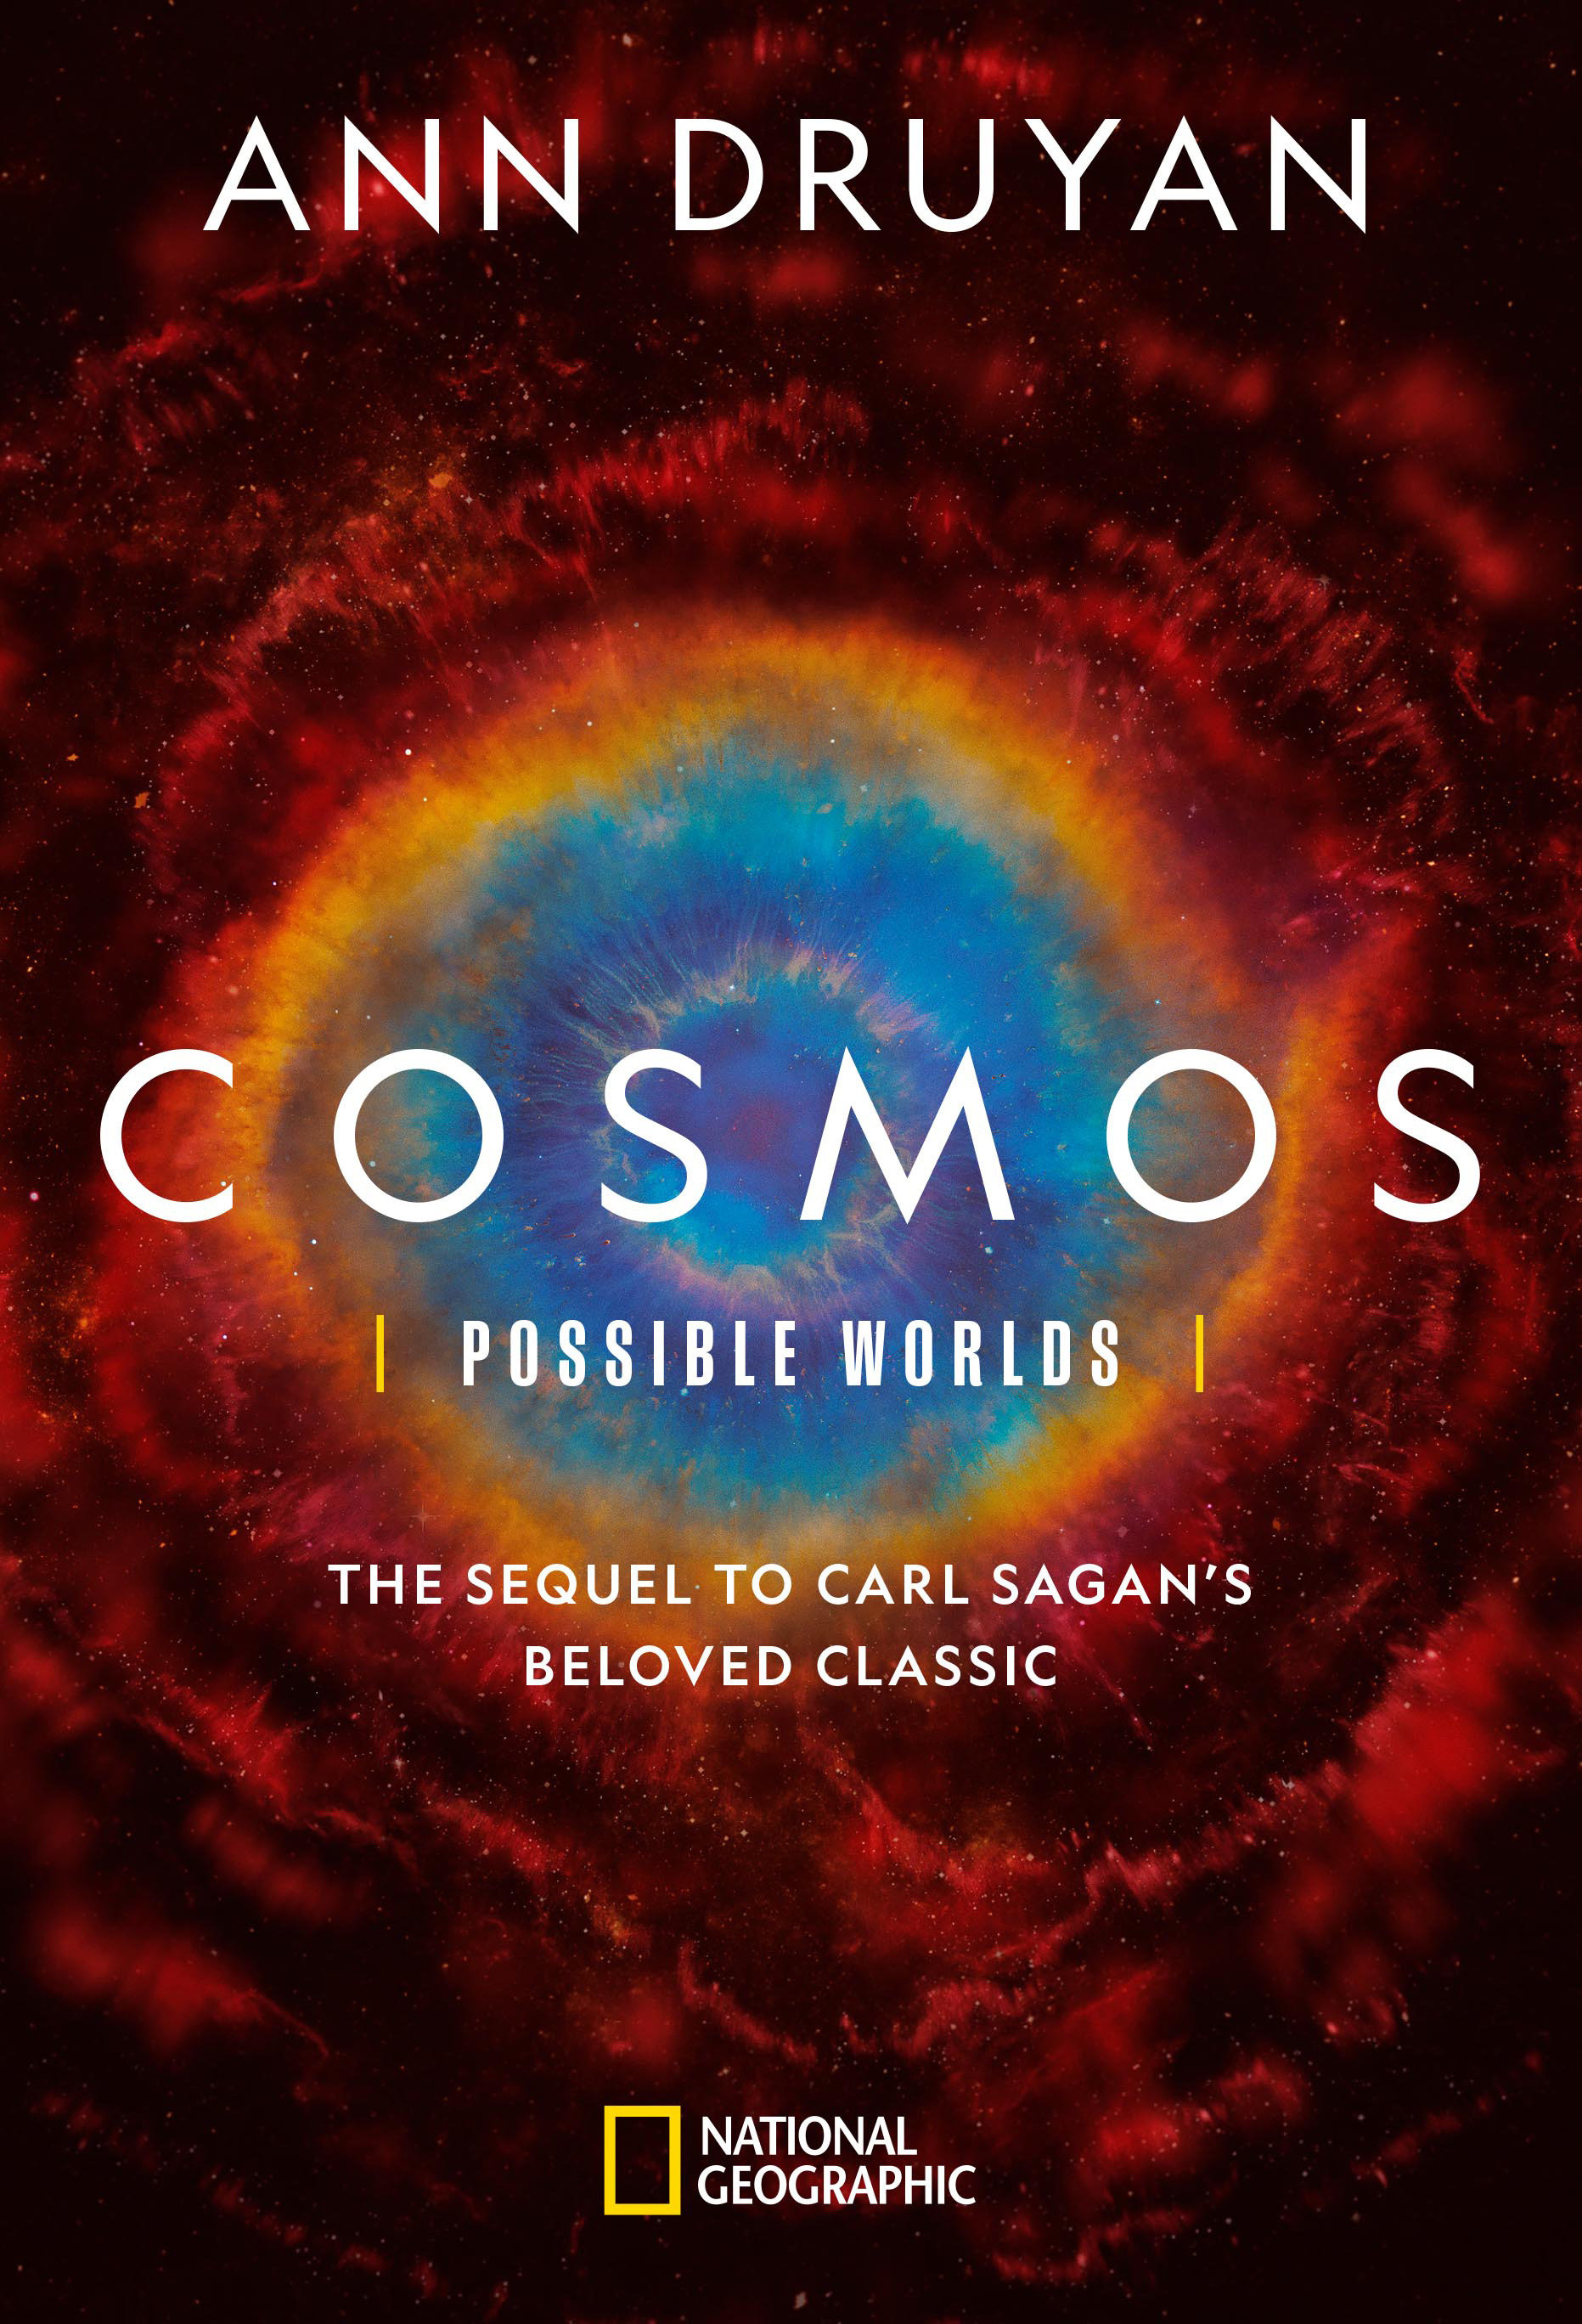 Cosmos: Possible Worlds (Hardcover Book)